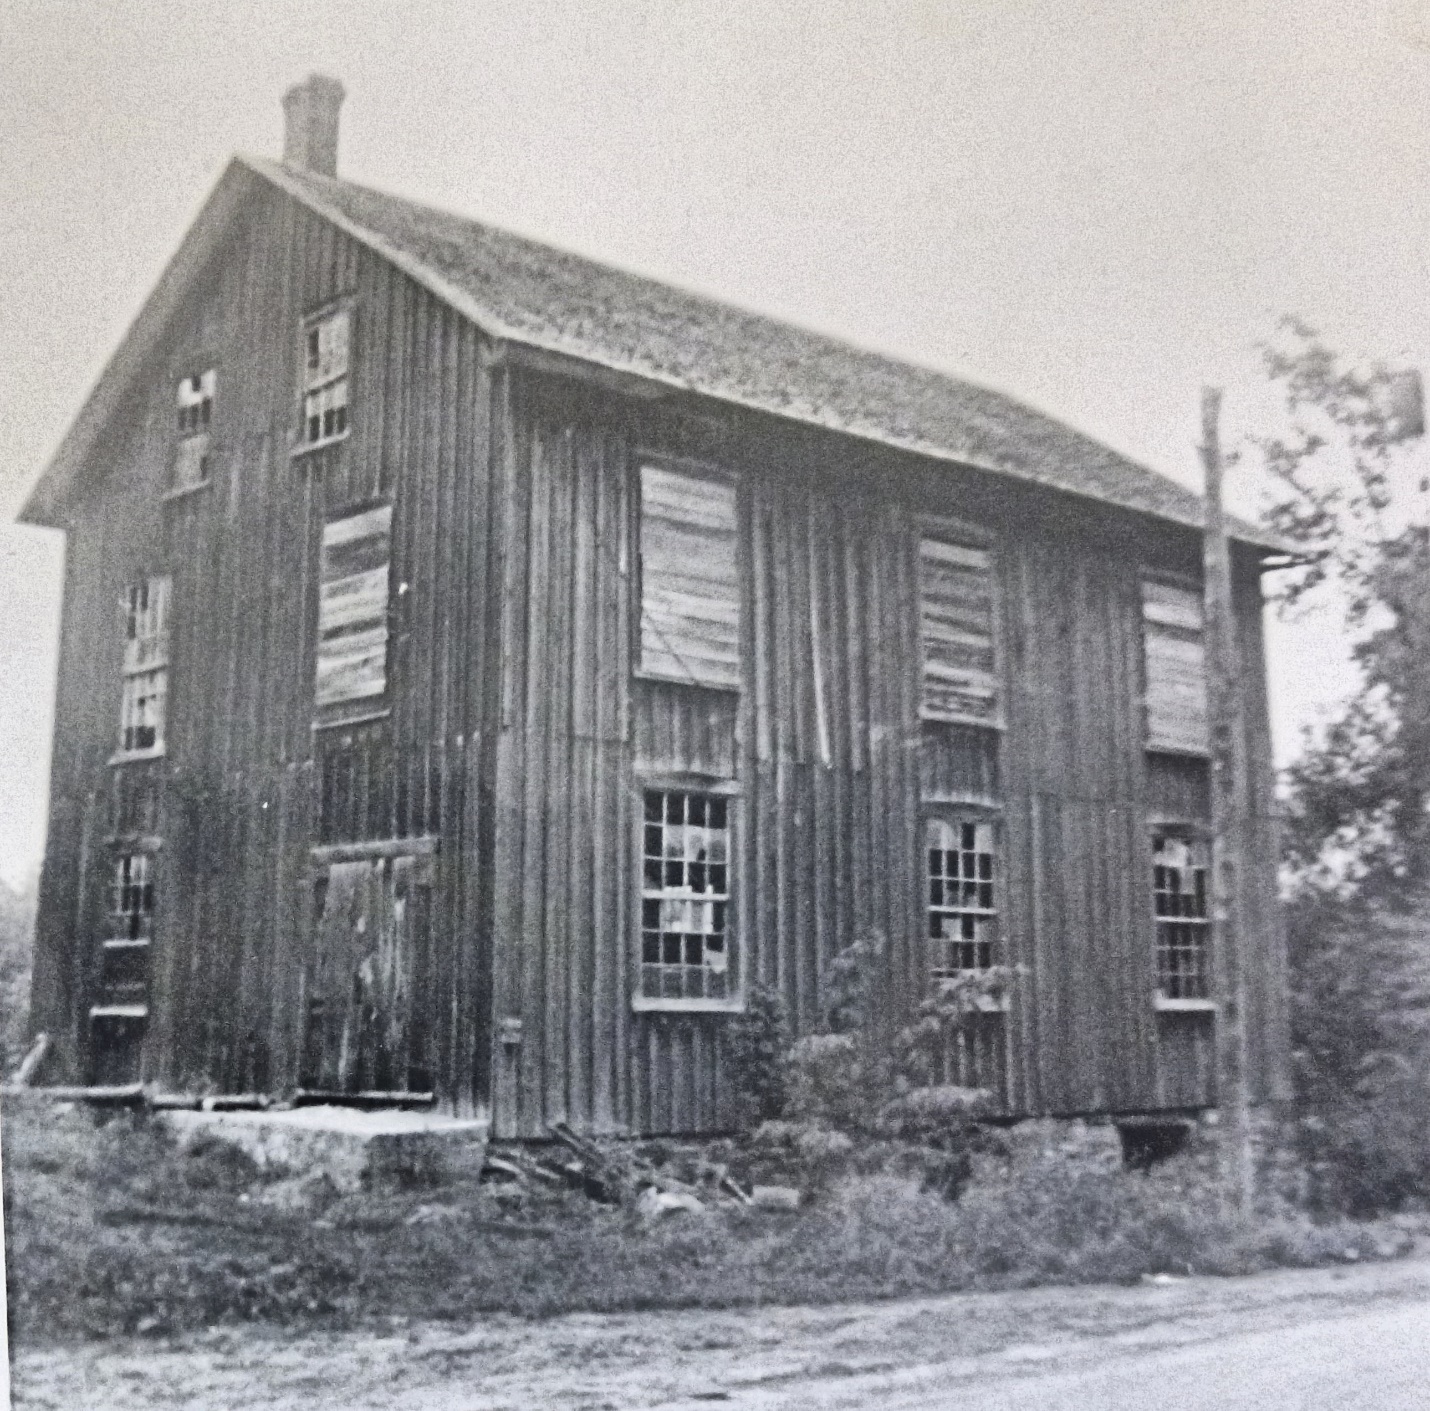 Grist Mill in 1955